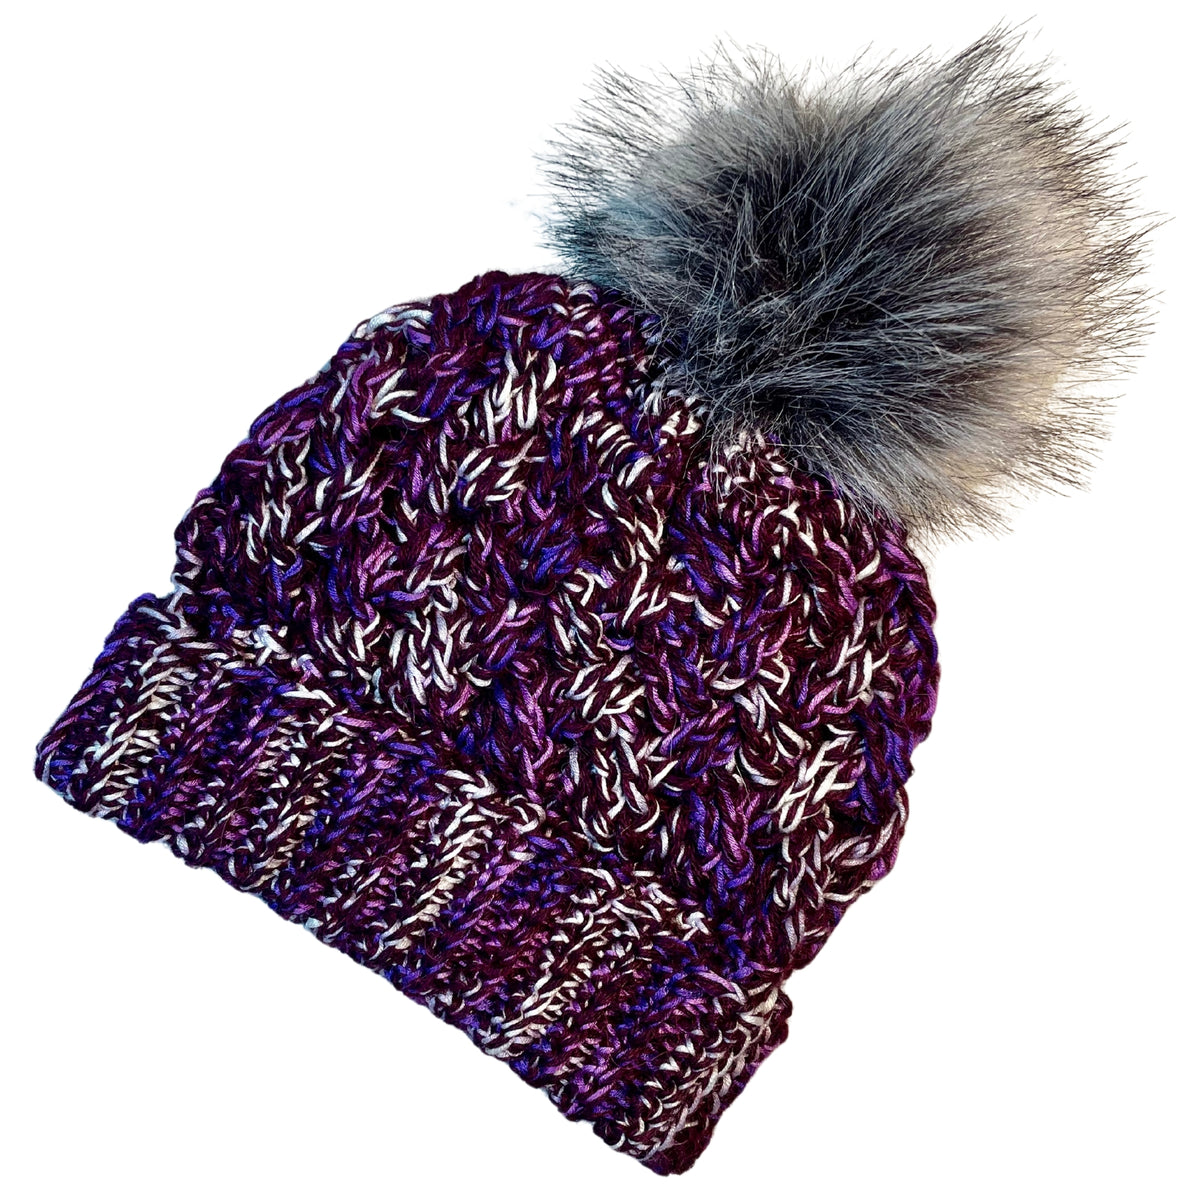 Deep purple, bright purple violet, and white colored cozy soft warm handmade knitted crochet celtic hat with a multi-gray pom pom made in Montana by Alpacas of Montana.